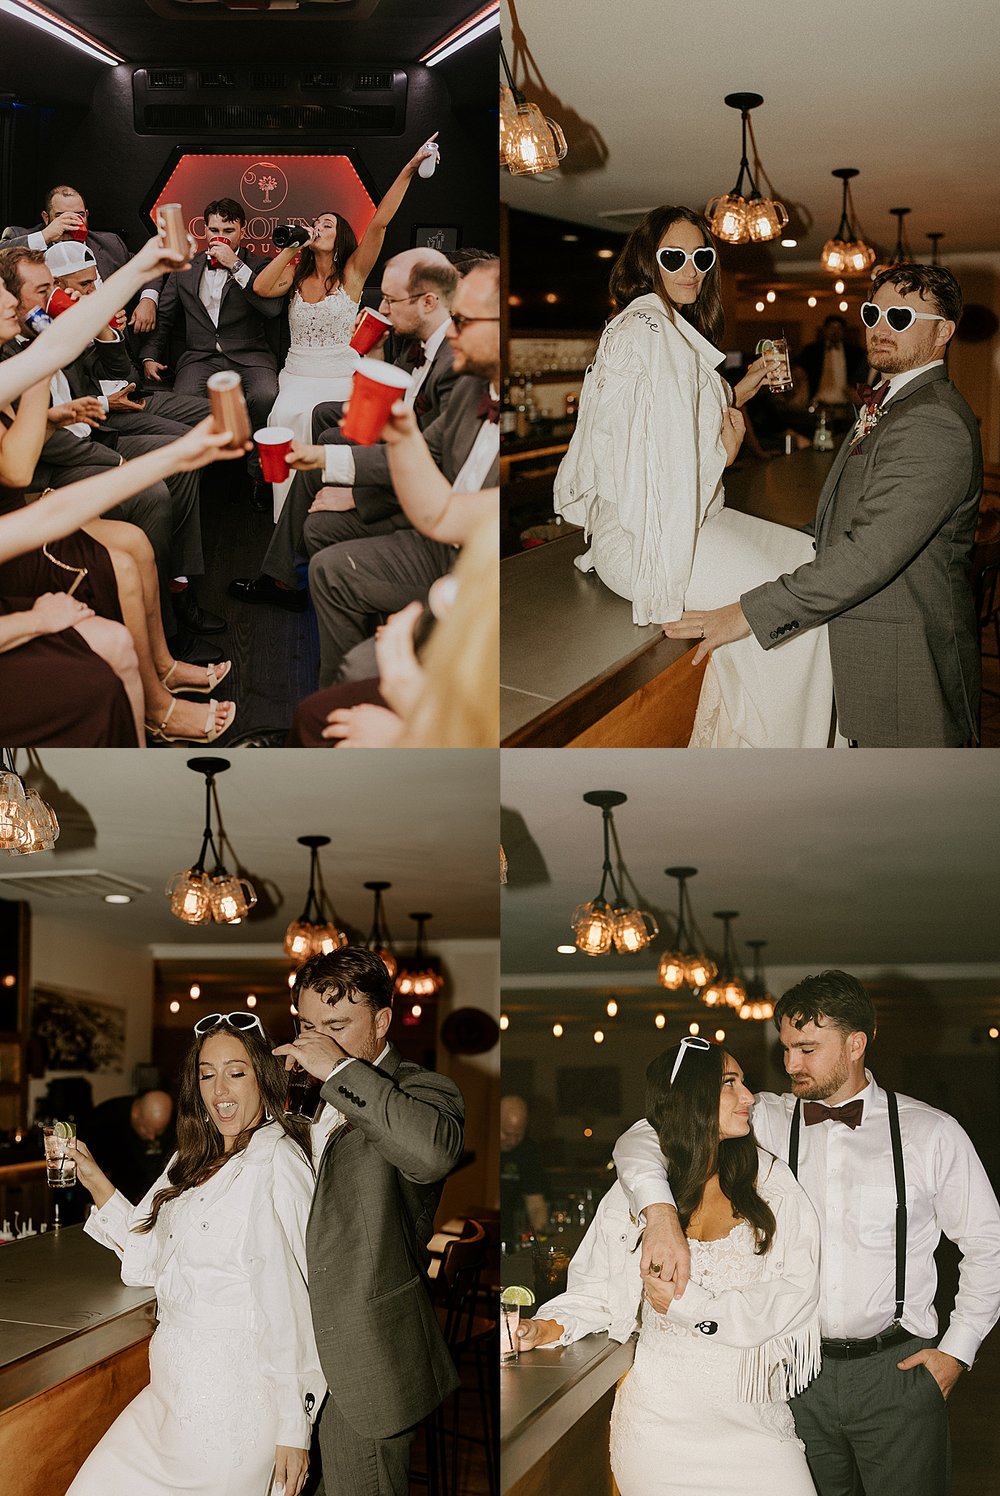  Couple dances together at bar by Michigan Wedding Photographer 